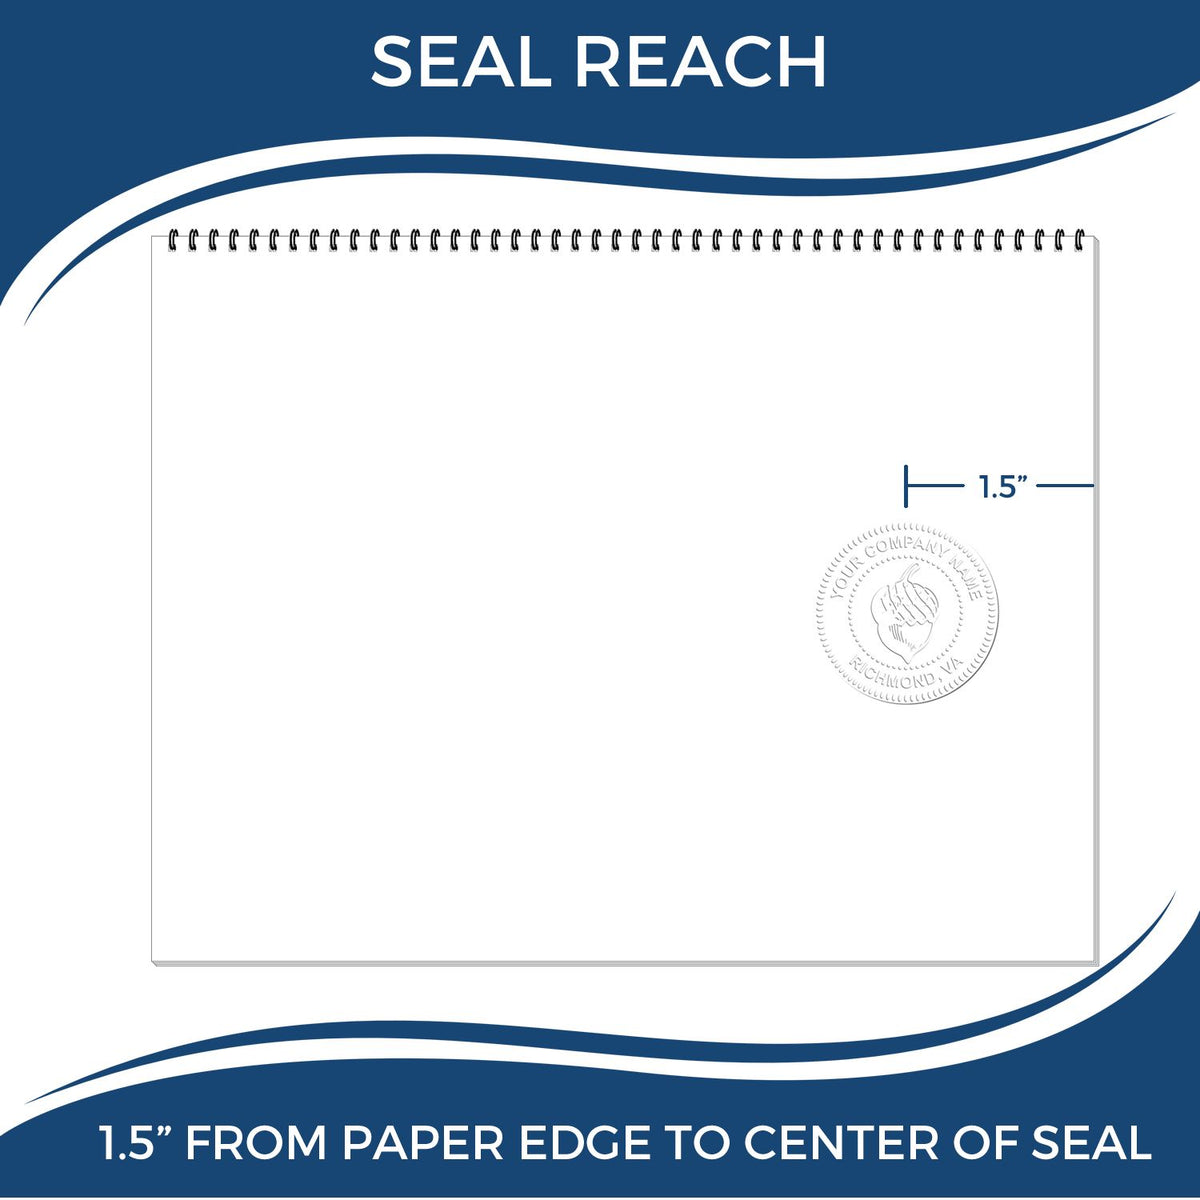 An infographic showing the seal reach which is represented by a ruler and a miniature seal image of the Hybrid Maryland Architect Seal